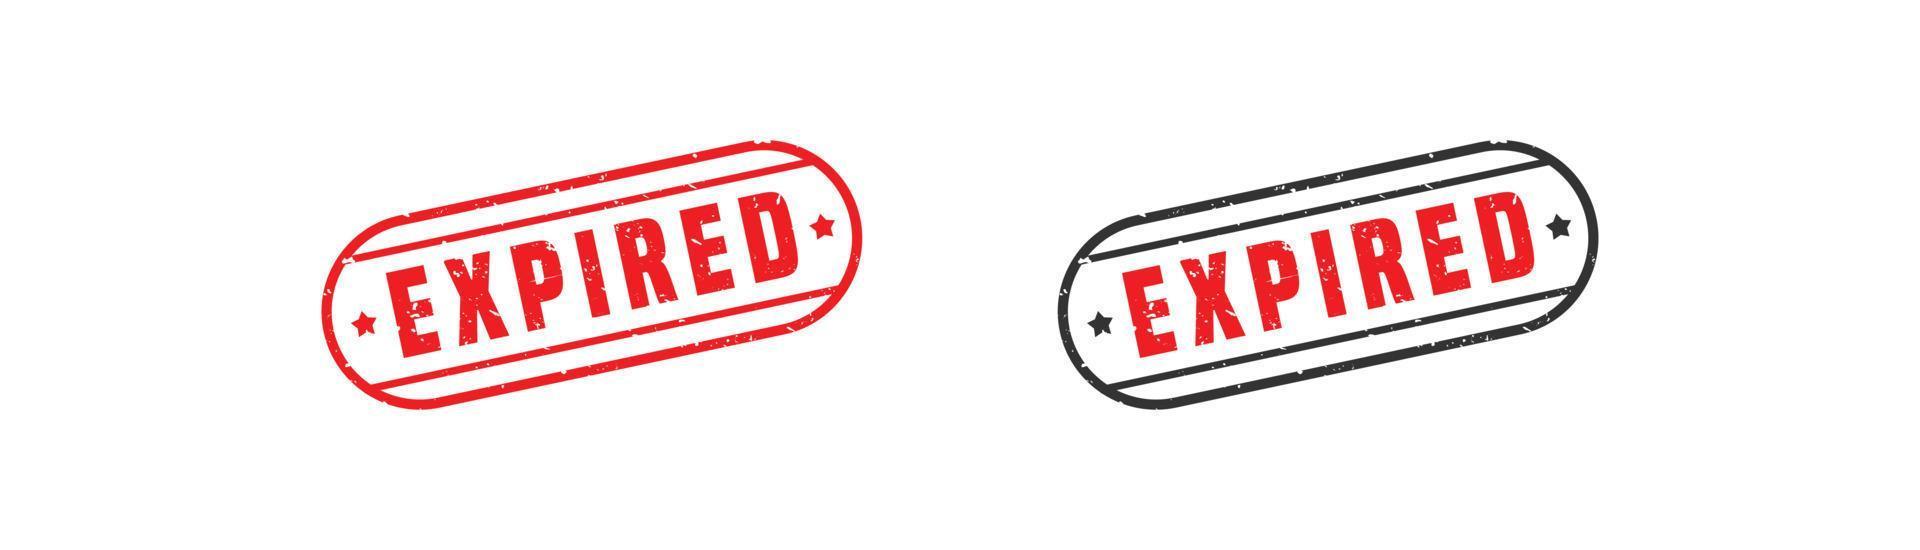 Expired stamp rubber with grunge style on white background. vector